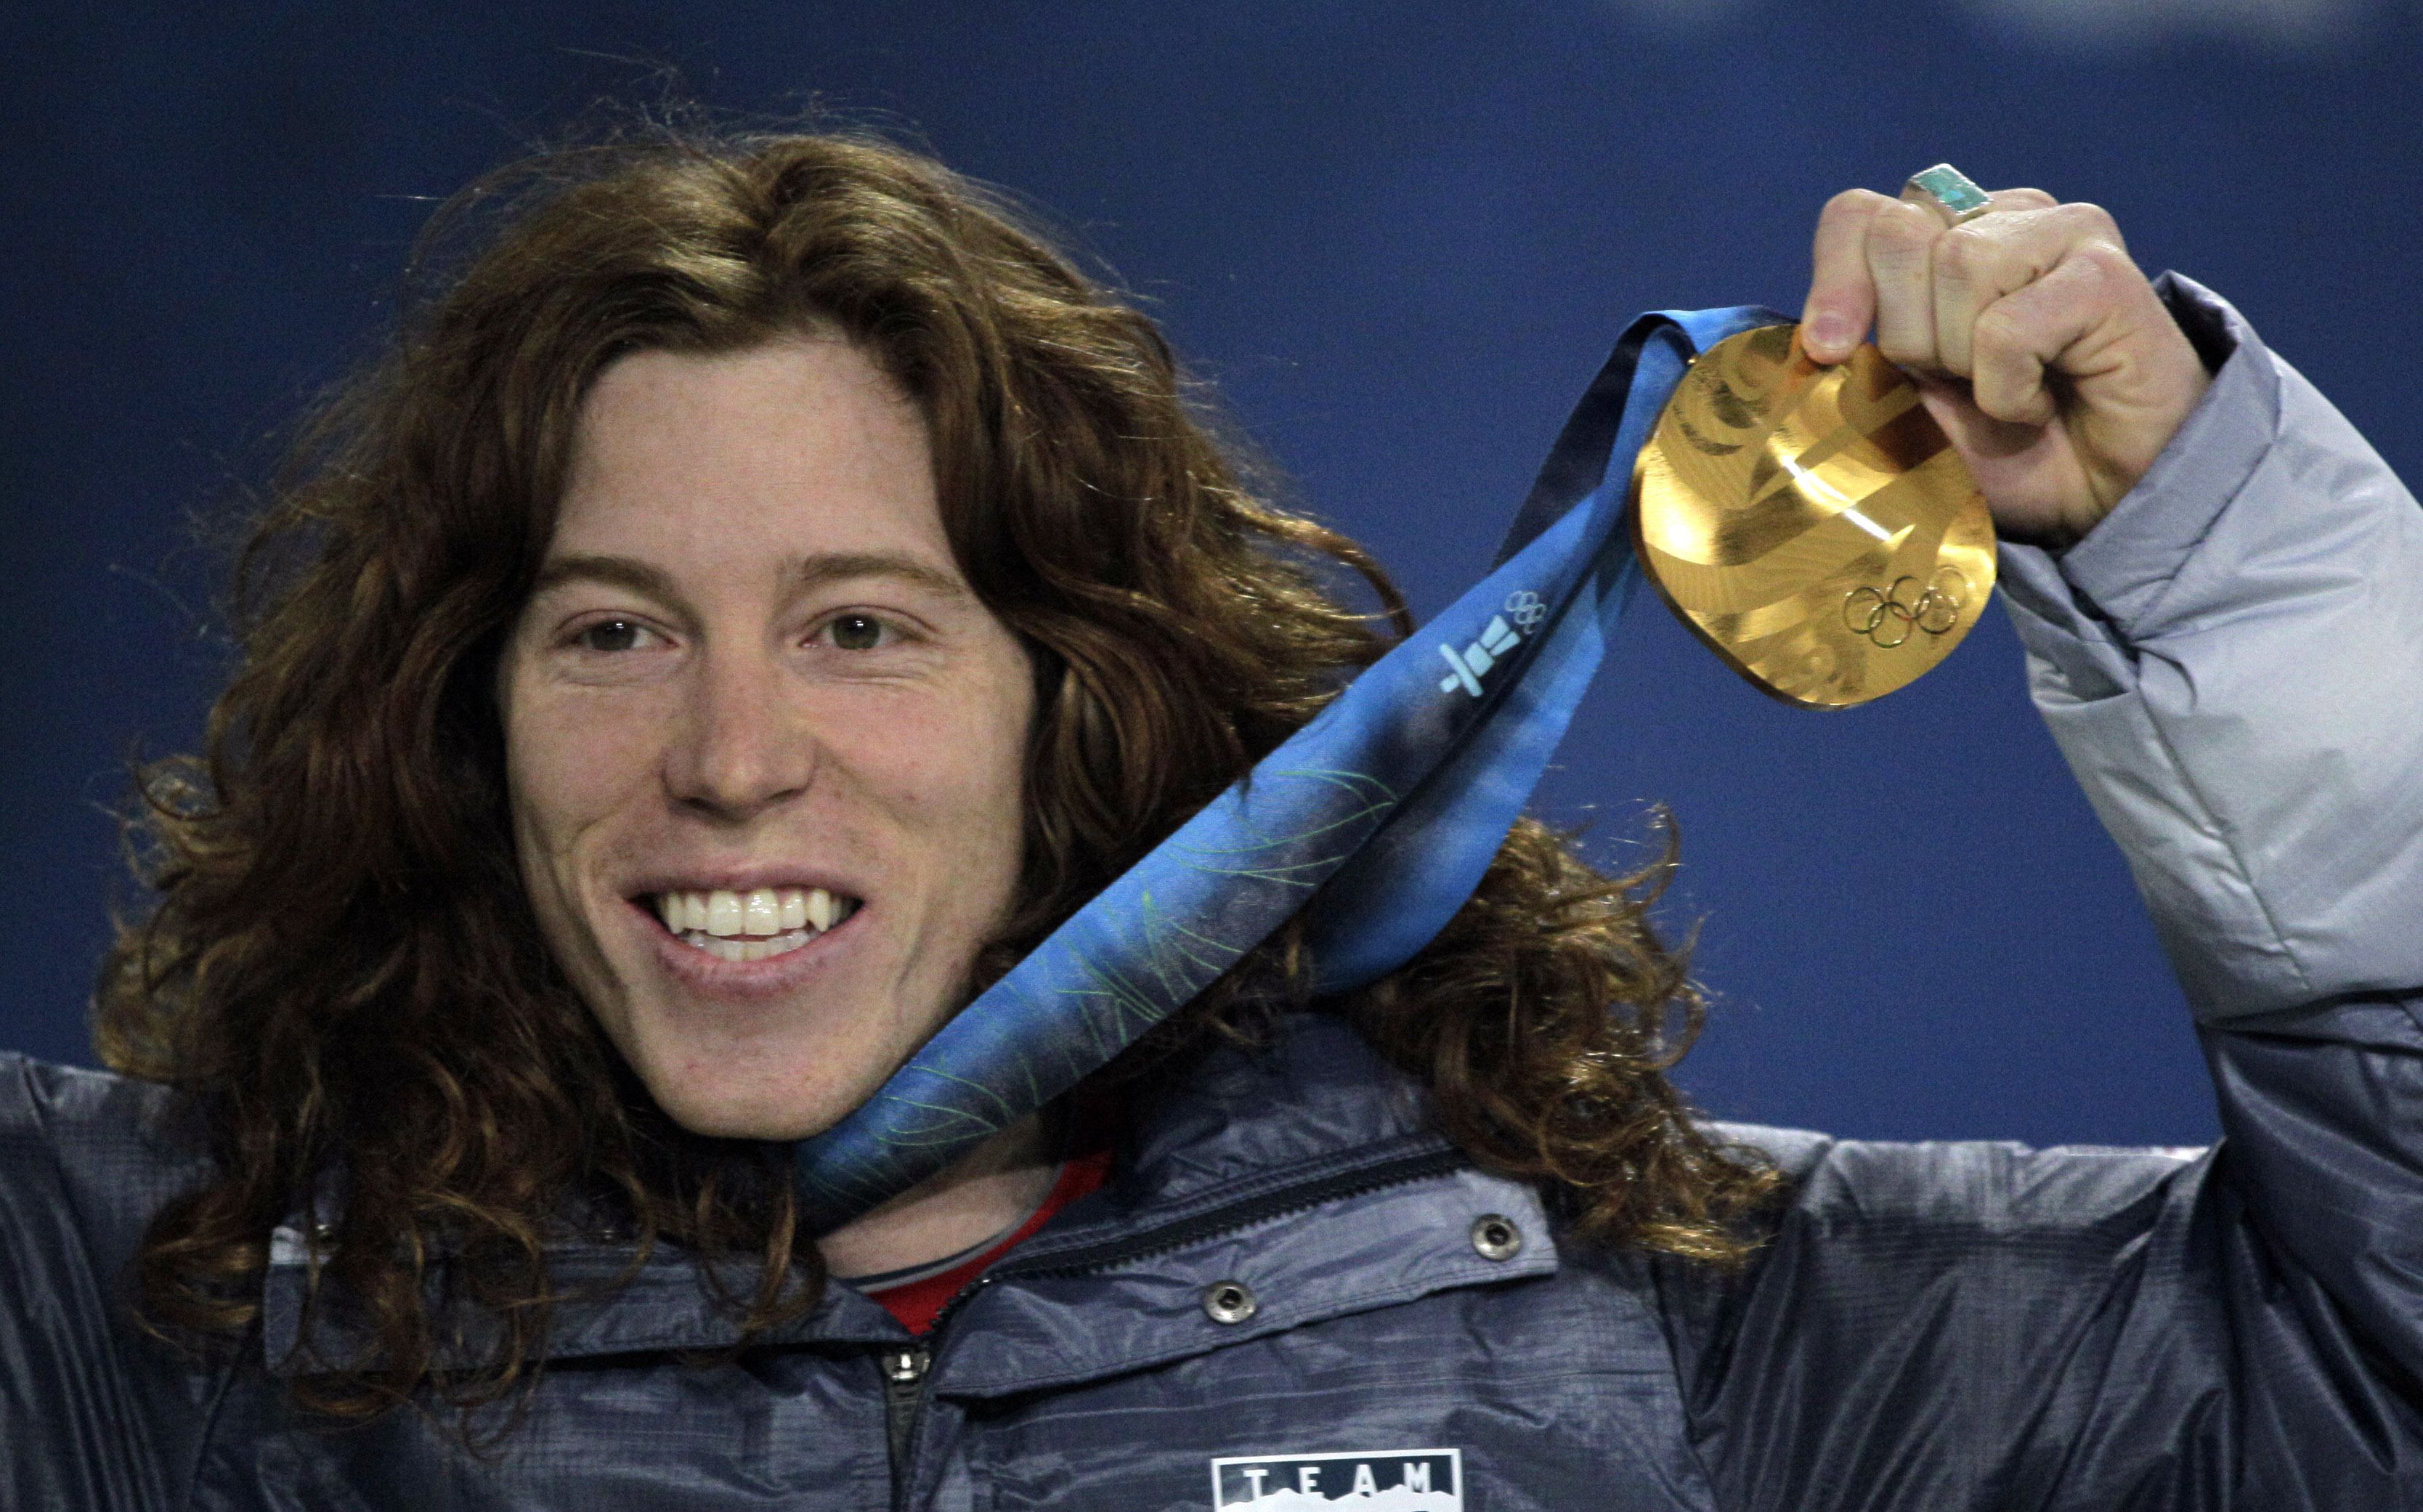 Olympic Gold Medalist Shaun White's Net Worth He Has Made Through